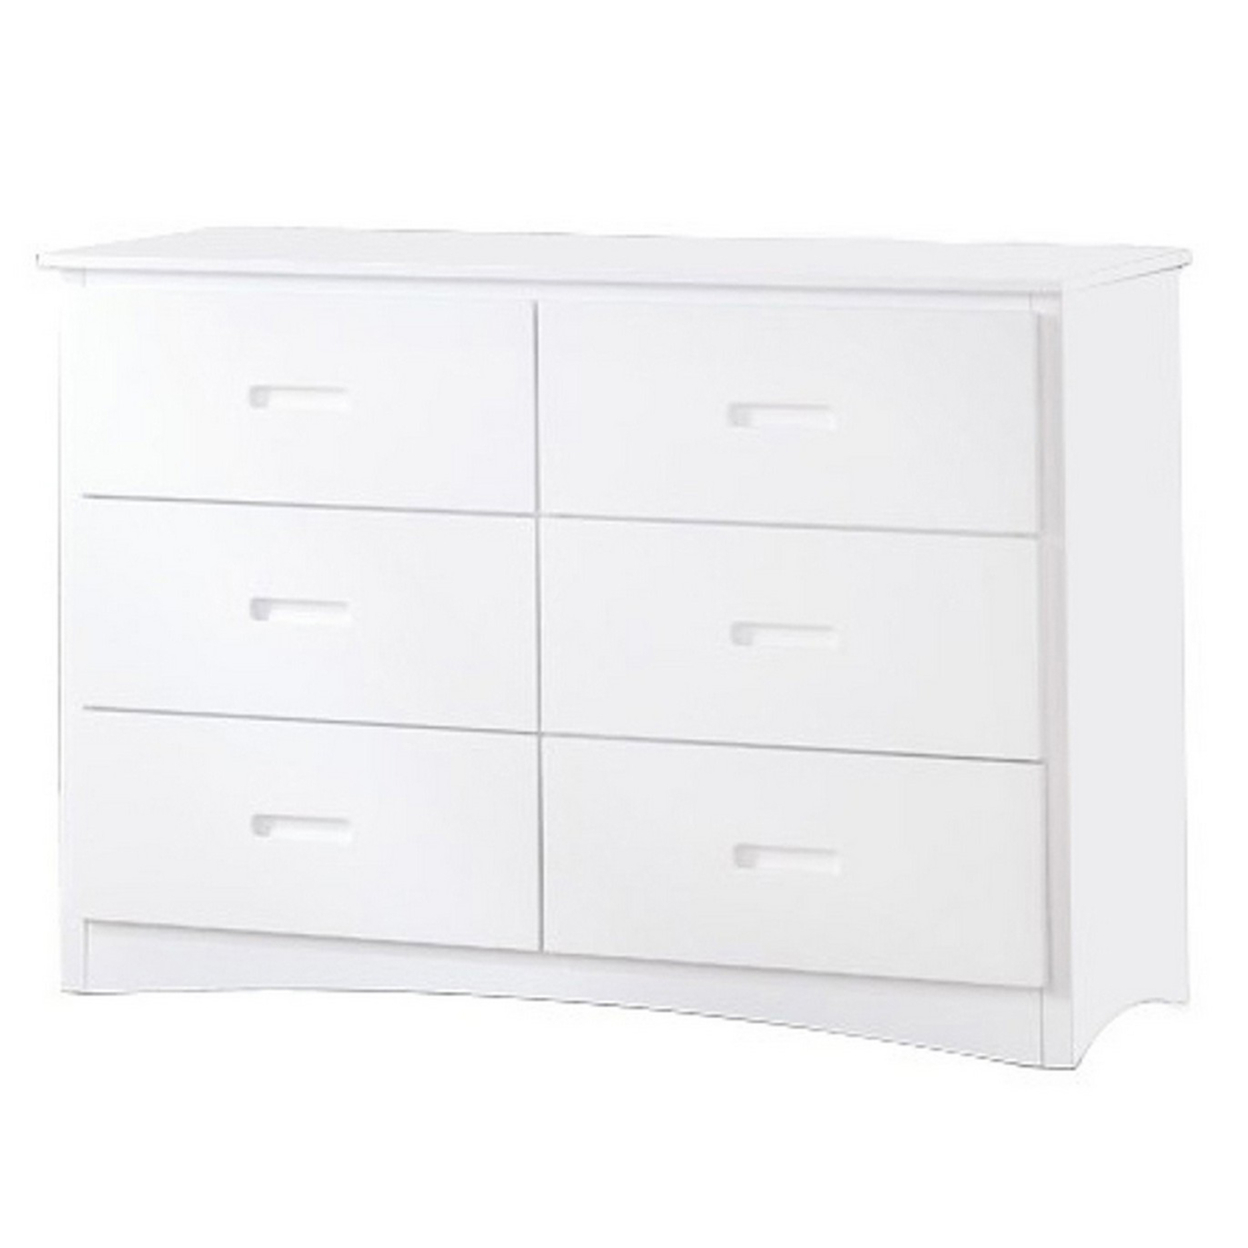 Contemporary Style 6 Drawer Wooden Dresser With Cutout Pulls, White- Saltoro Sherpi